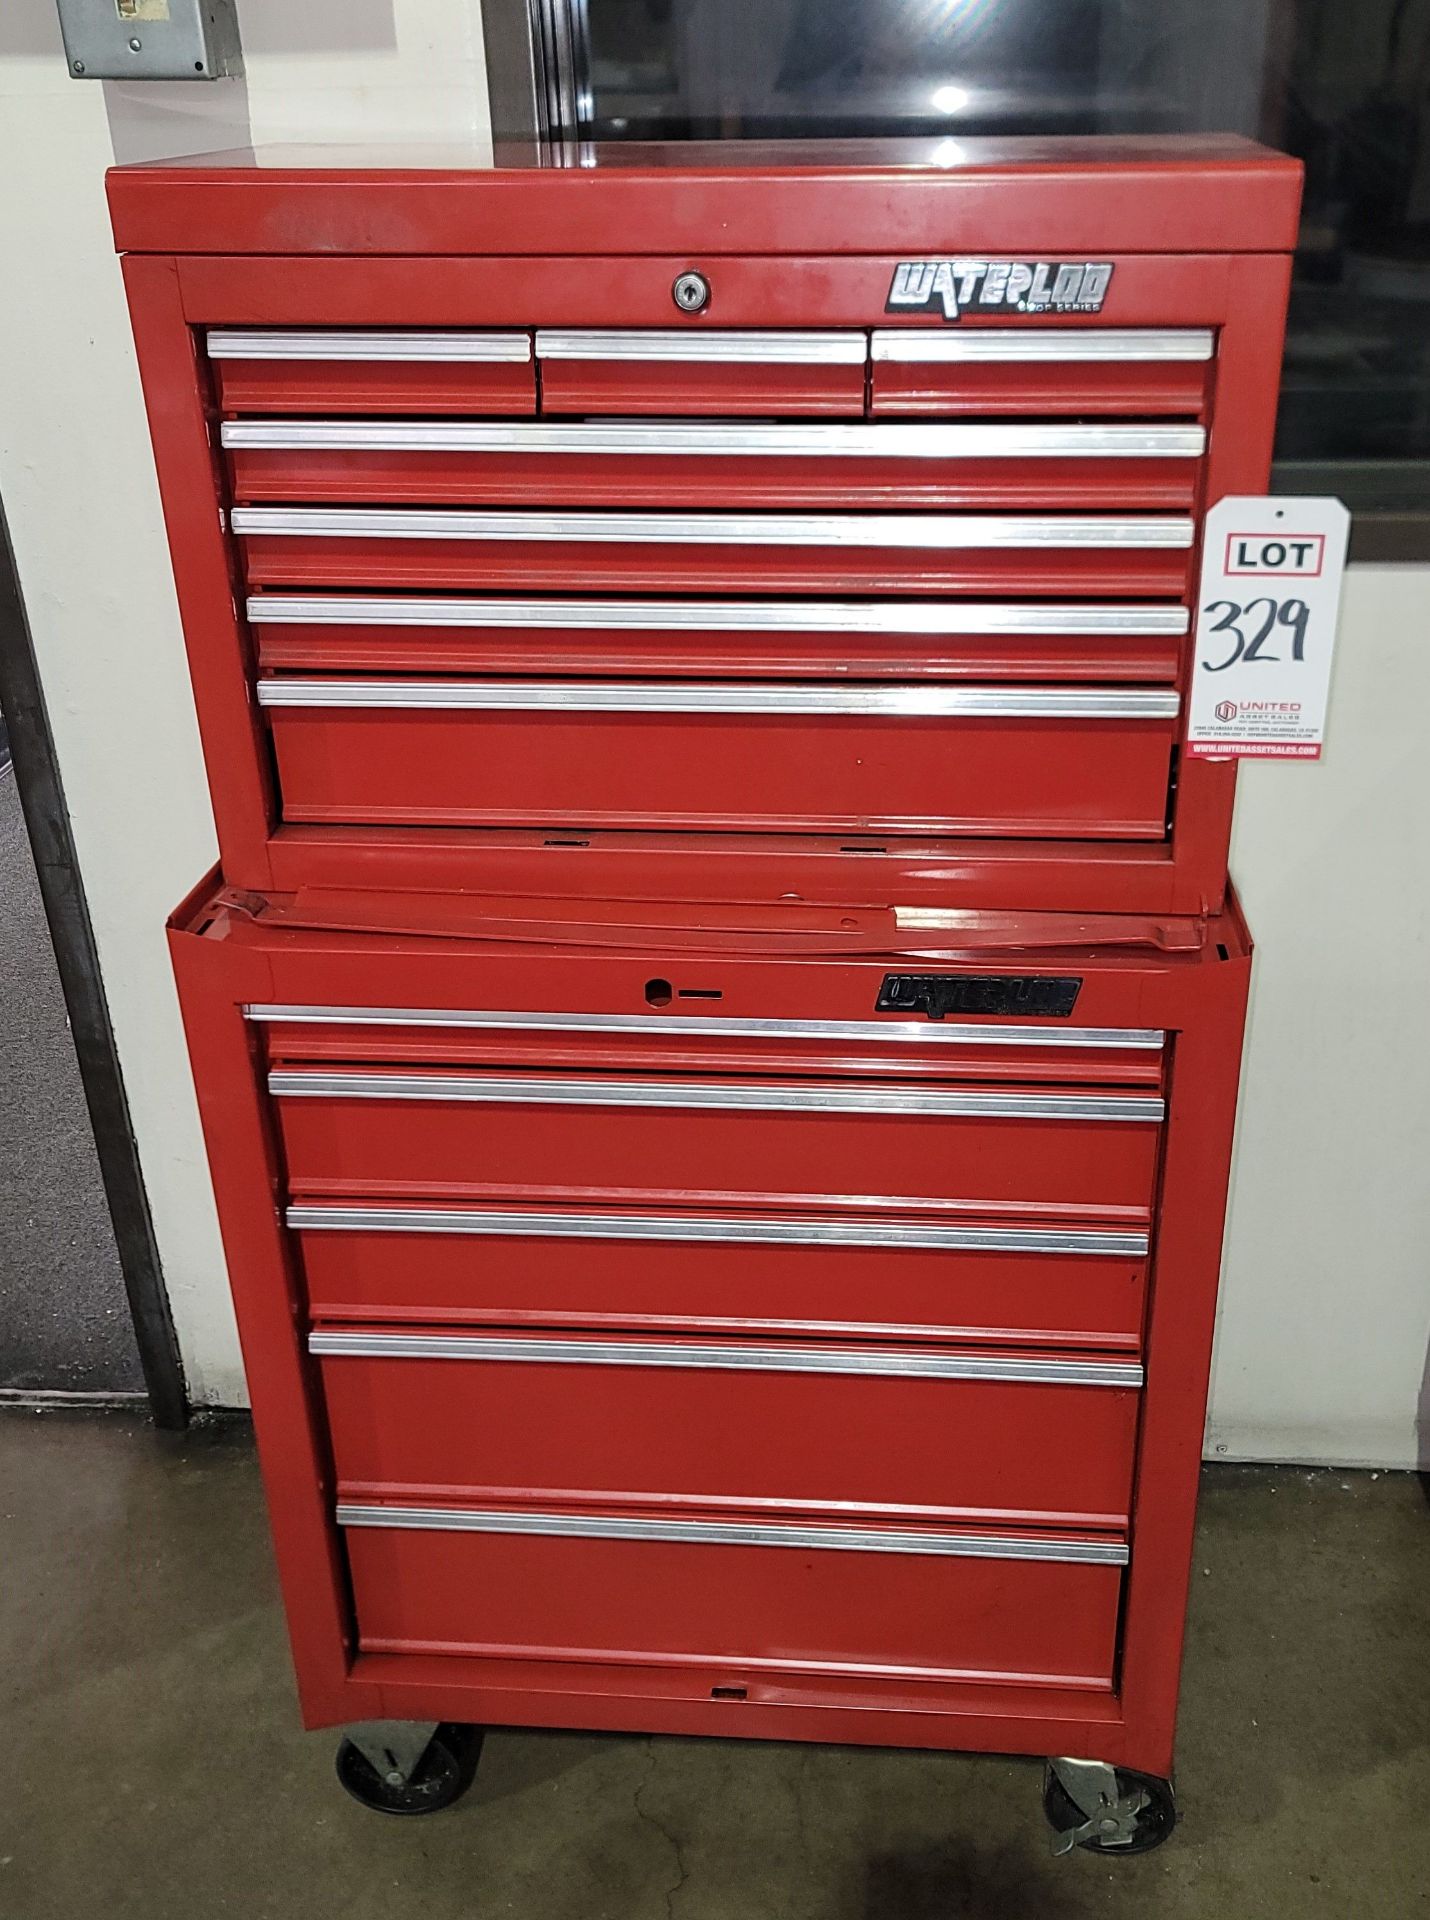 WATERLOO SHOP SERIES TOOL BOXES, TOP & BOTTOM, ON CASTERS, EMPTY, 26-1/2" X 18" X 49" OVERALL